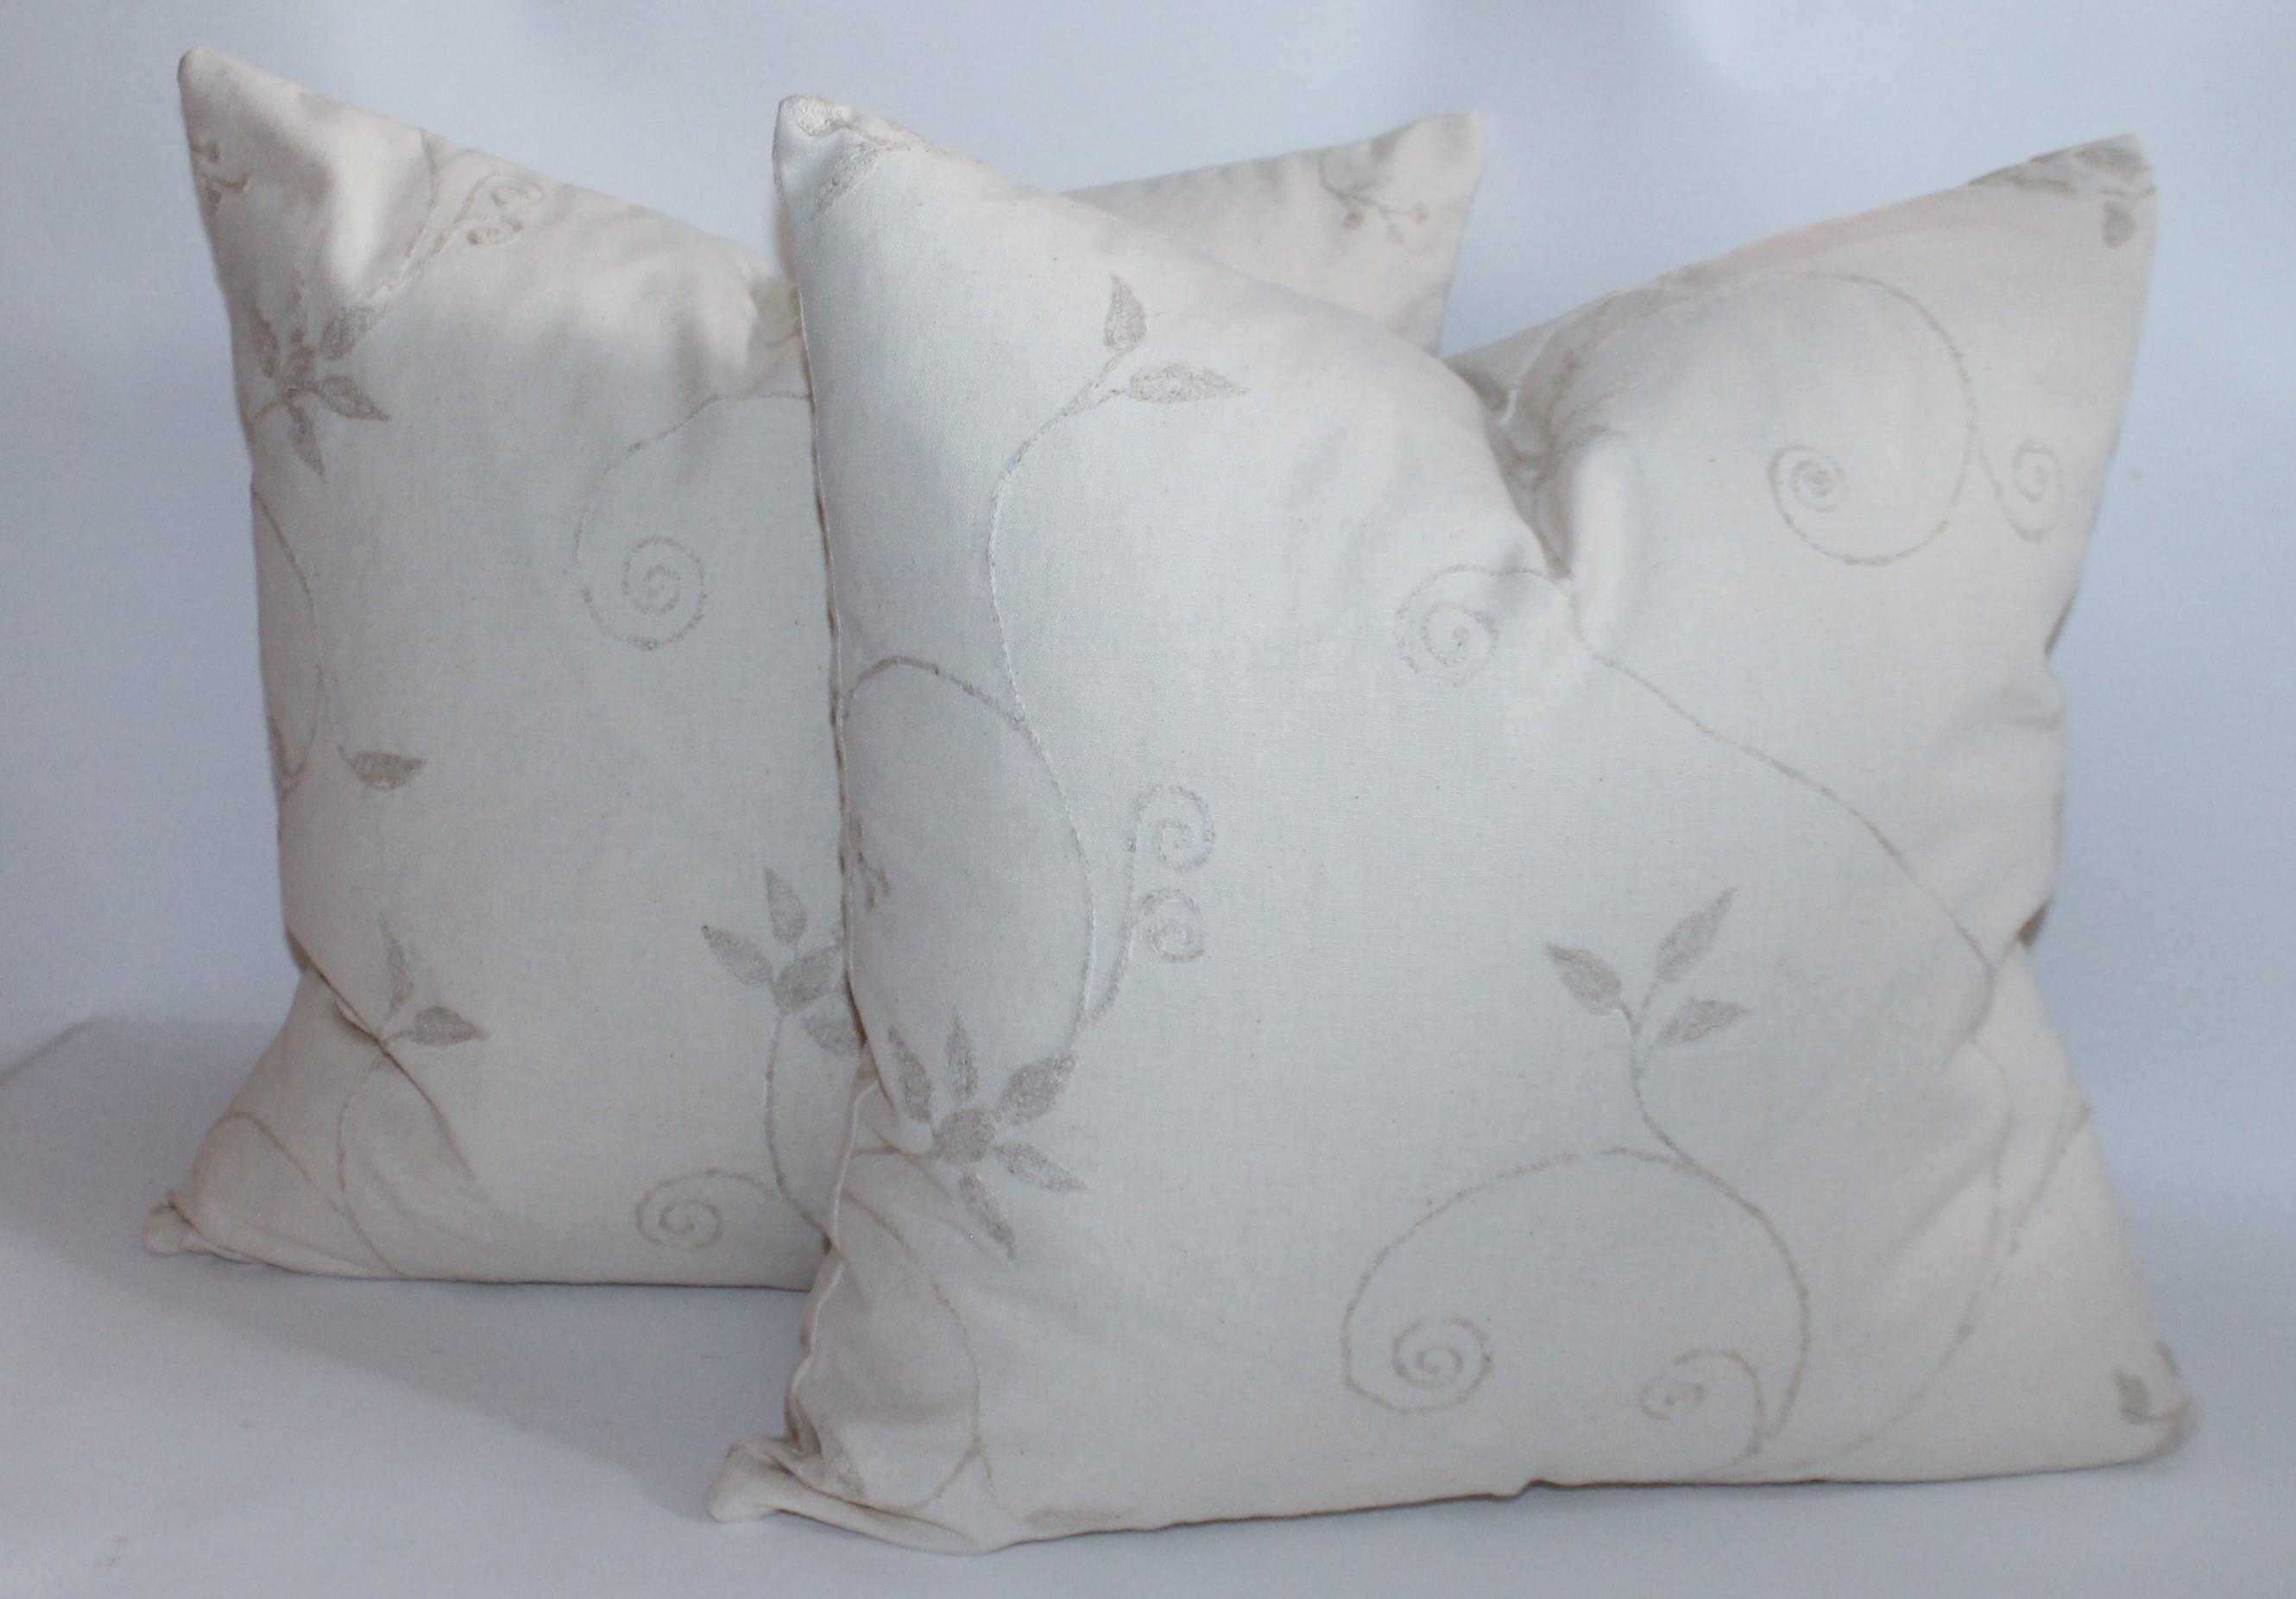 Cream crewel work pillows in a collection of four. Reversible fabric both front and back. They are down and feather fill.